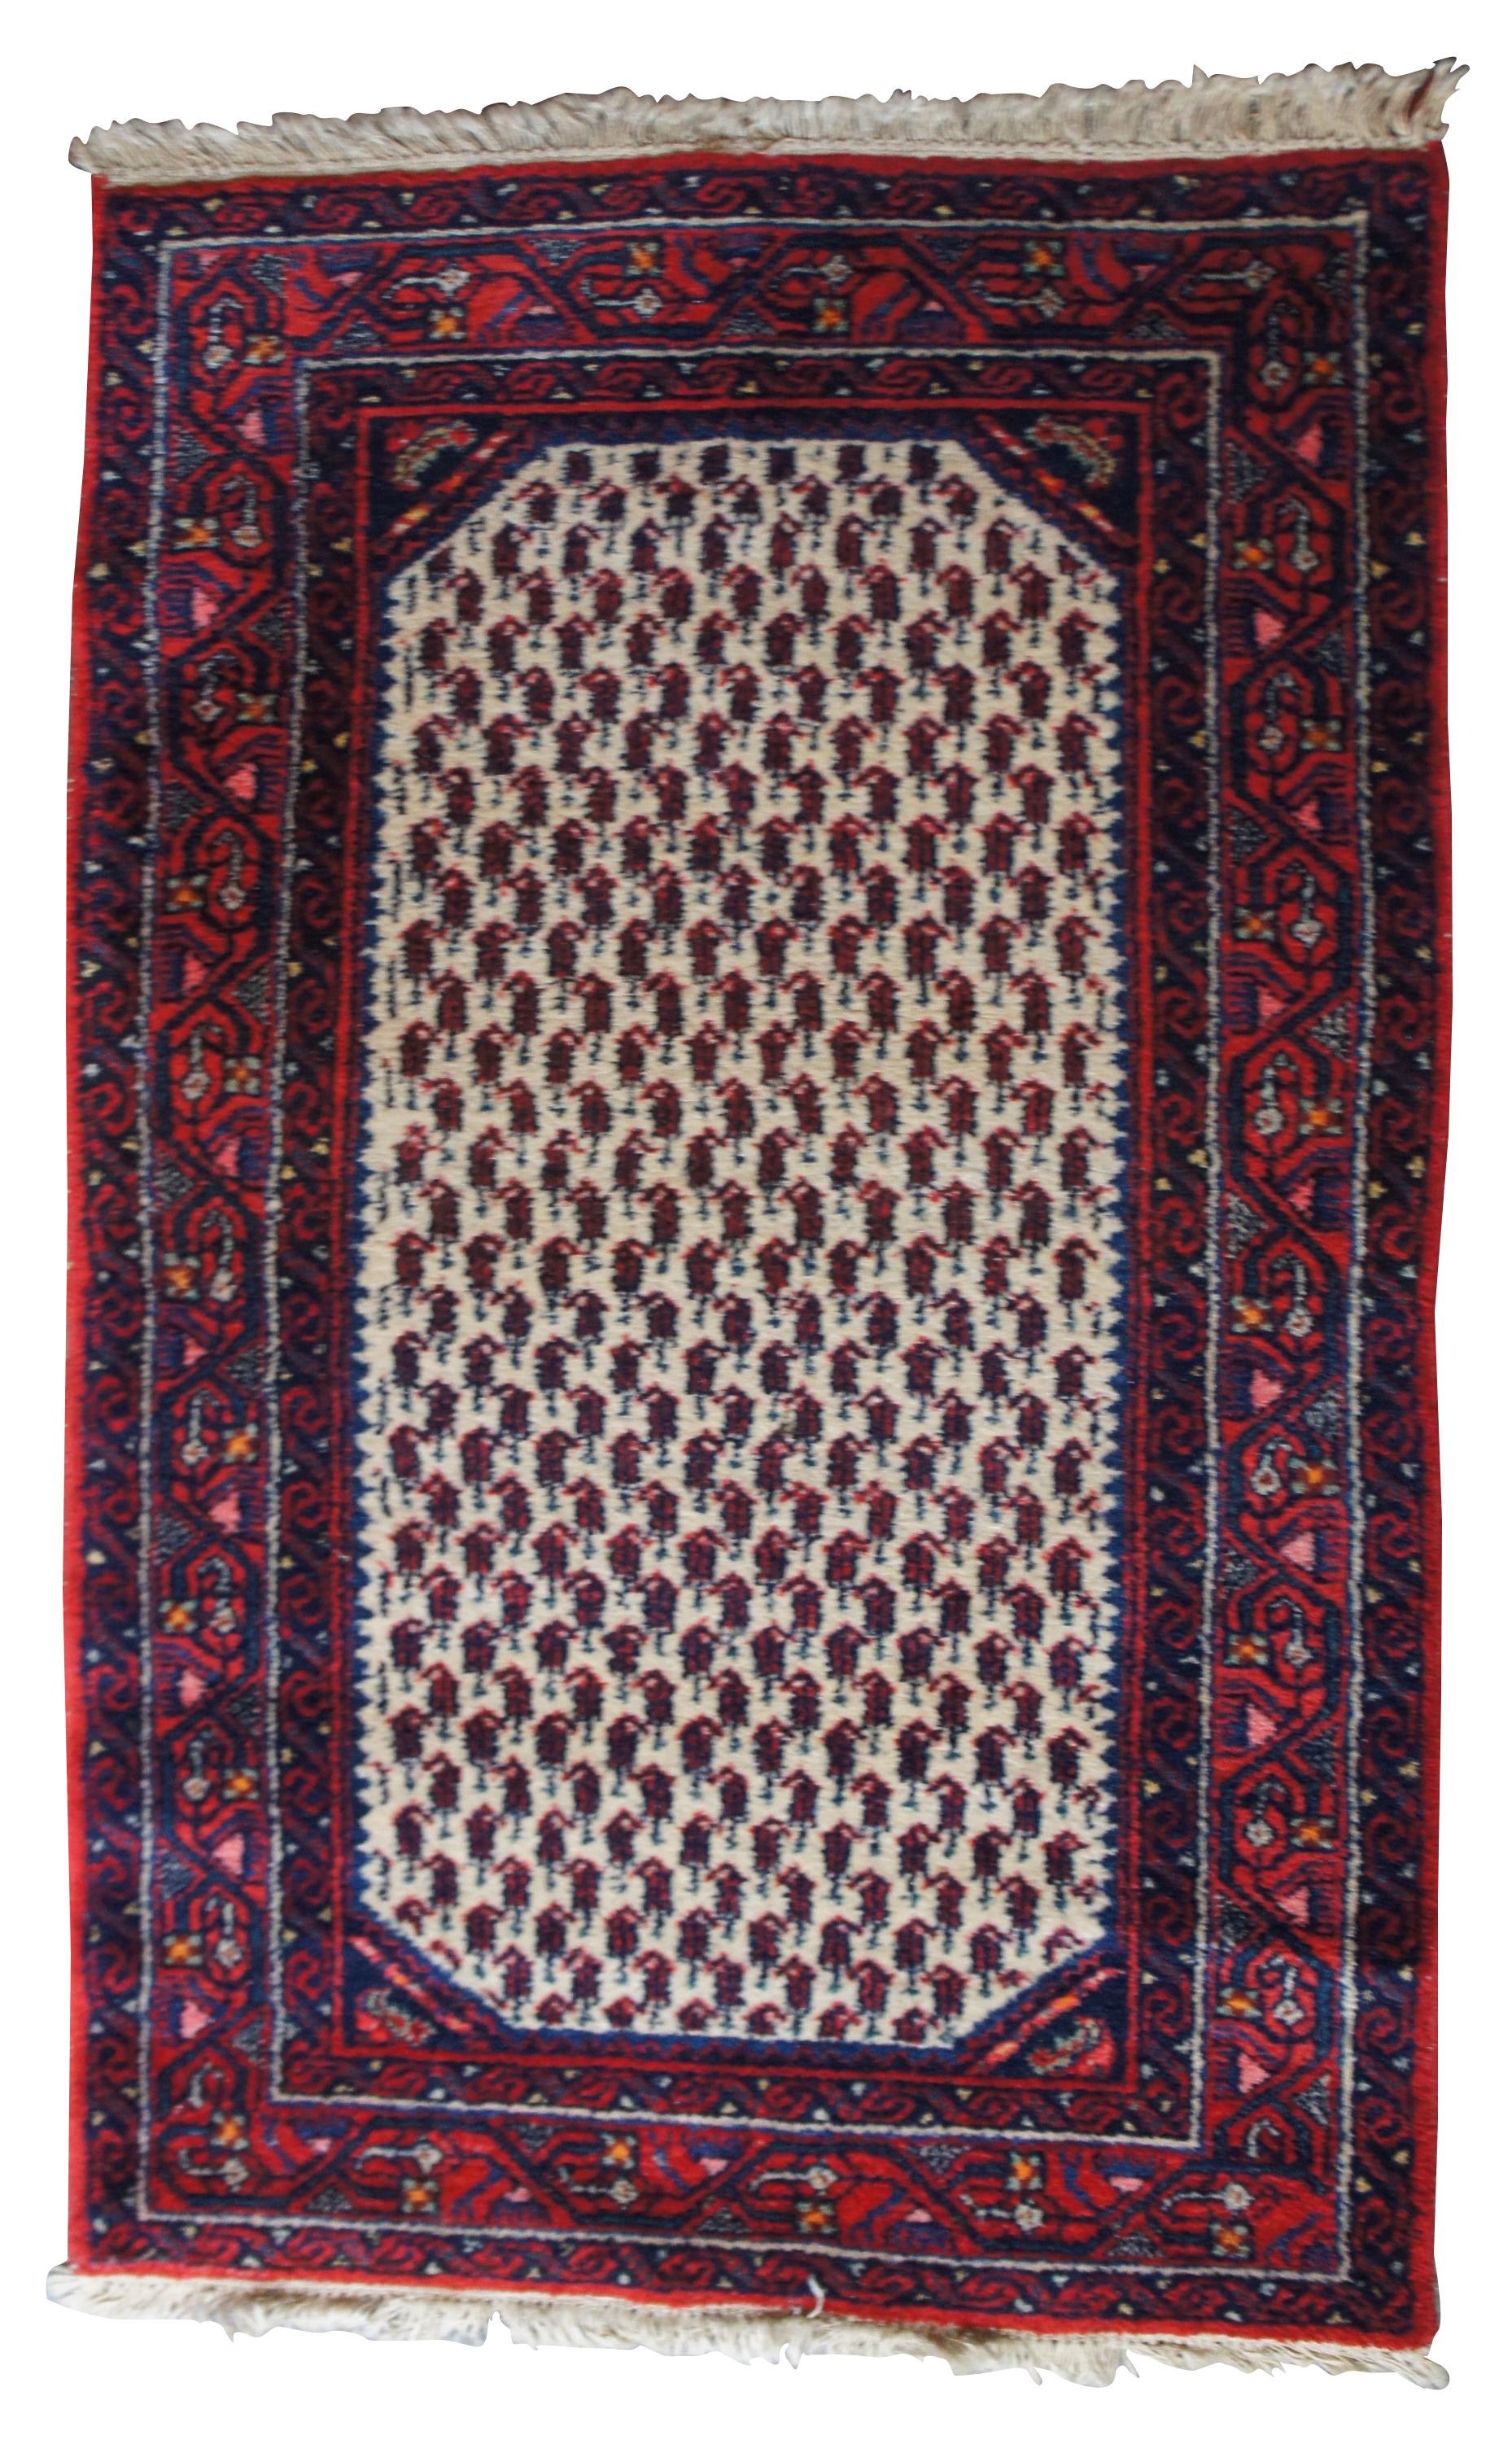 Ianian area rug features a field of red and blues with a cream center. Measures: 3' x 4'.
 